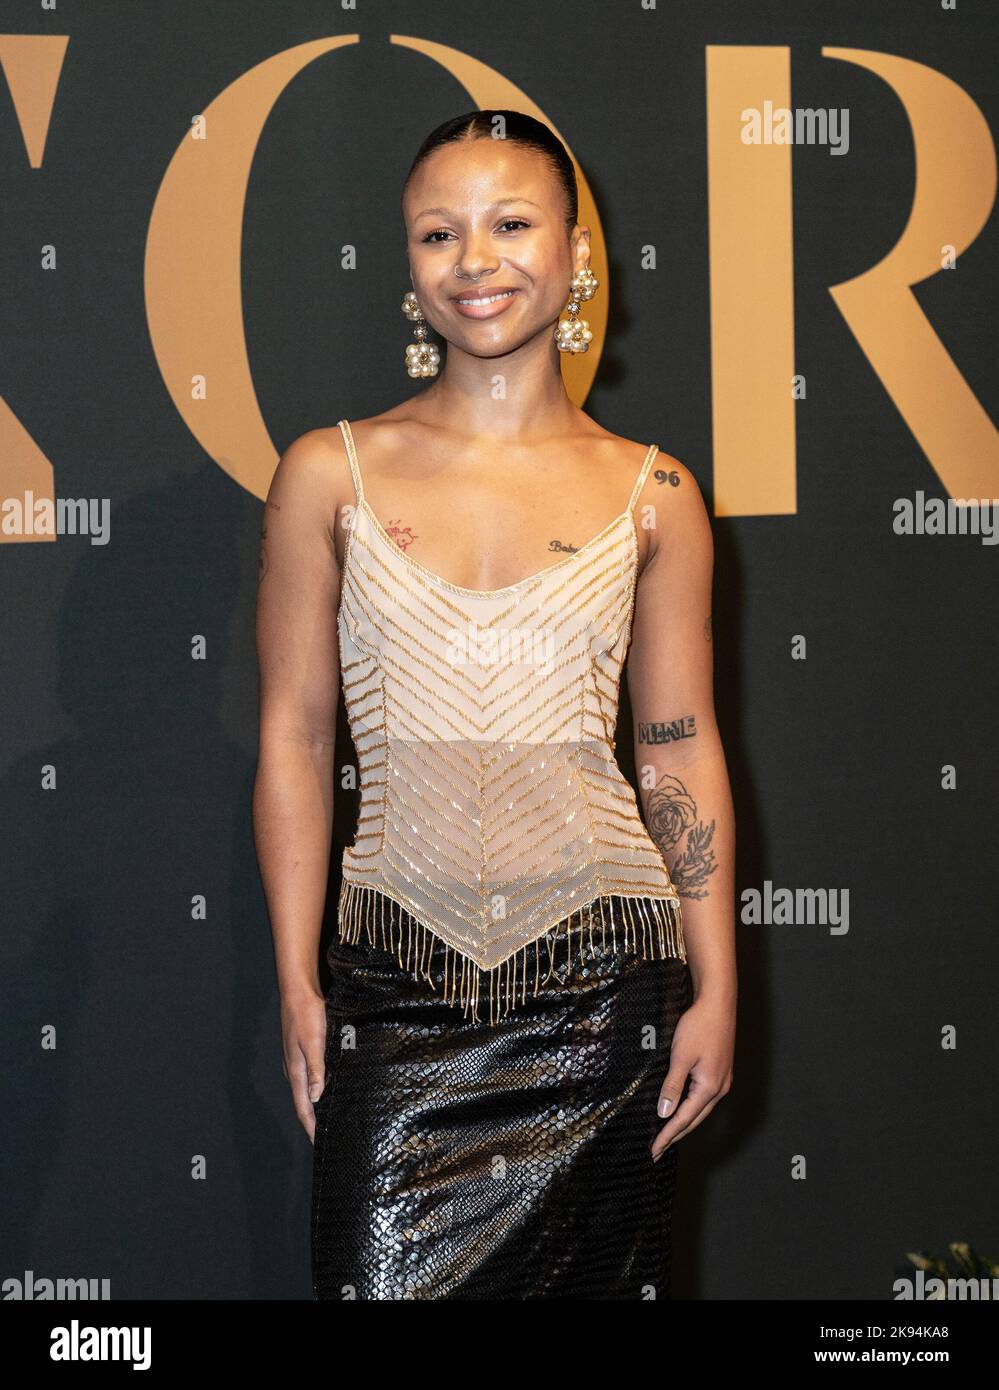 New York, United States. 25th Oct, 2022. Myha'la Herrold attends 2022 WWD Honors Awards ceremony at Casa Cipriani (Photo by Lev Radin/Pacific Press) Credit: Pacific Press Media Production Corp./Alamy Live News Stock Photo